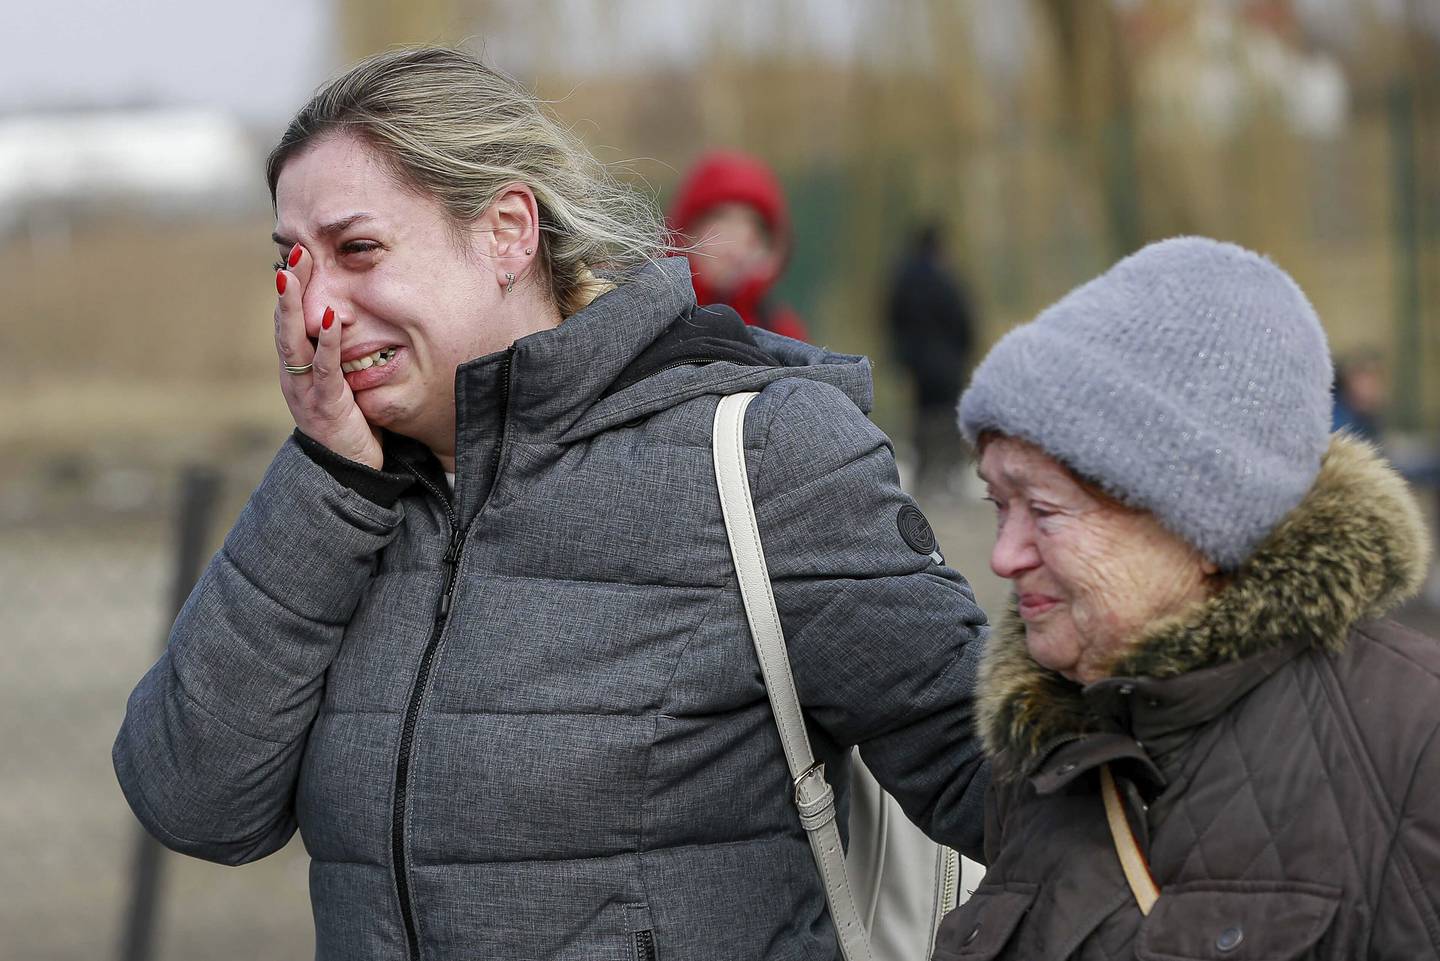 A Ukrainian woman reacts after arriving at the Medyka border crossing, in Poland, Sunday, Feb. 27, 2022. Since Russia launched its offensive on Ukraine, more than 200,000 people have been forced to flee the country to bordering nations like Romania, Poland, Hungary, Moldova, and the Czech Republic — in what the U.N. refugee agency, UNHCR, said will have "devastating humanitarian consequences" on civilians. (AP Photo/Visar Kryeziu)